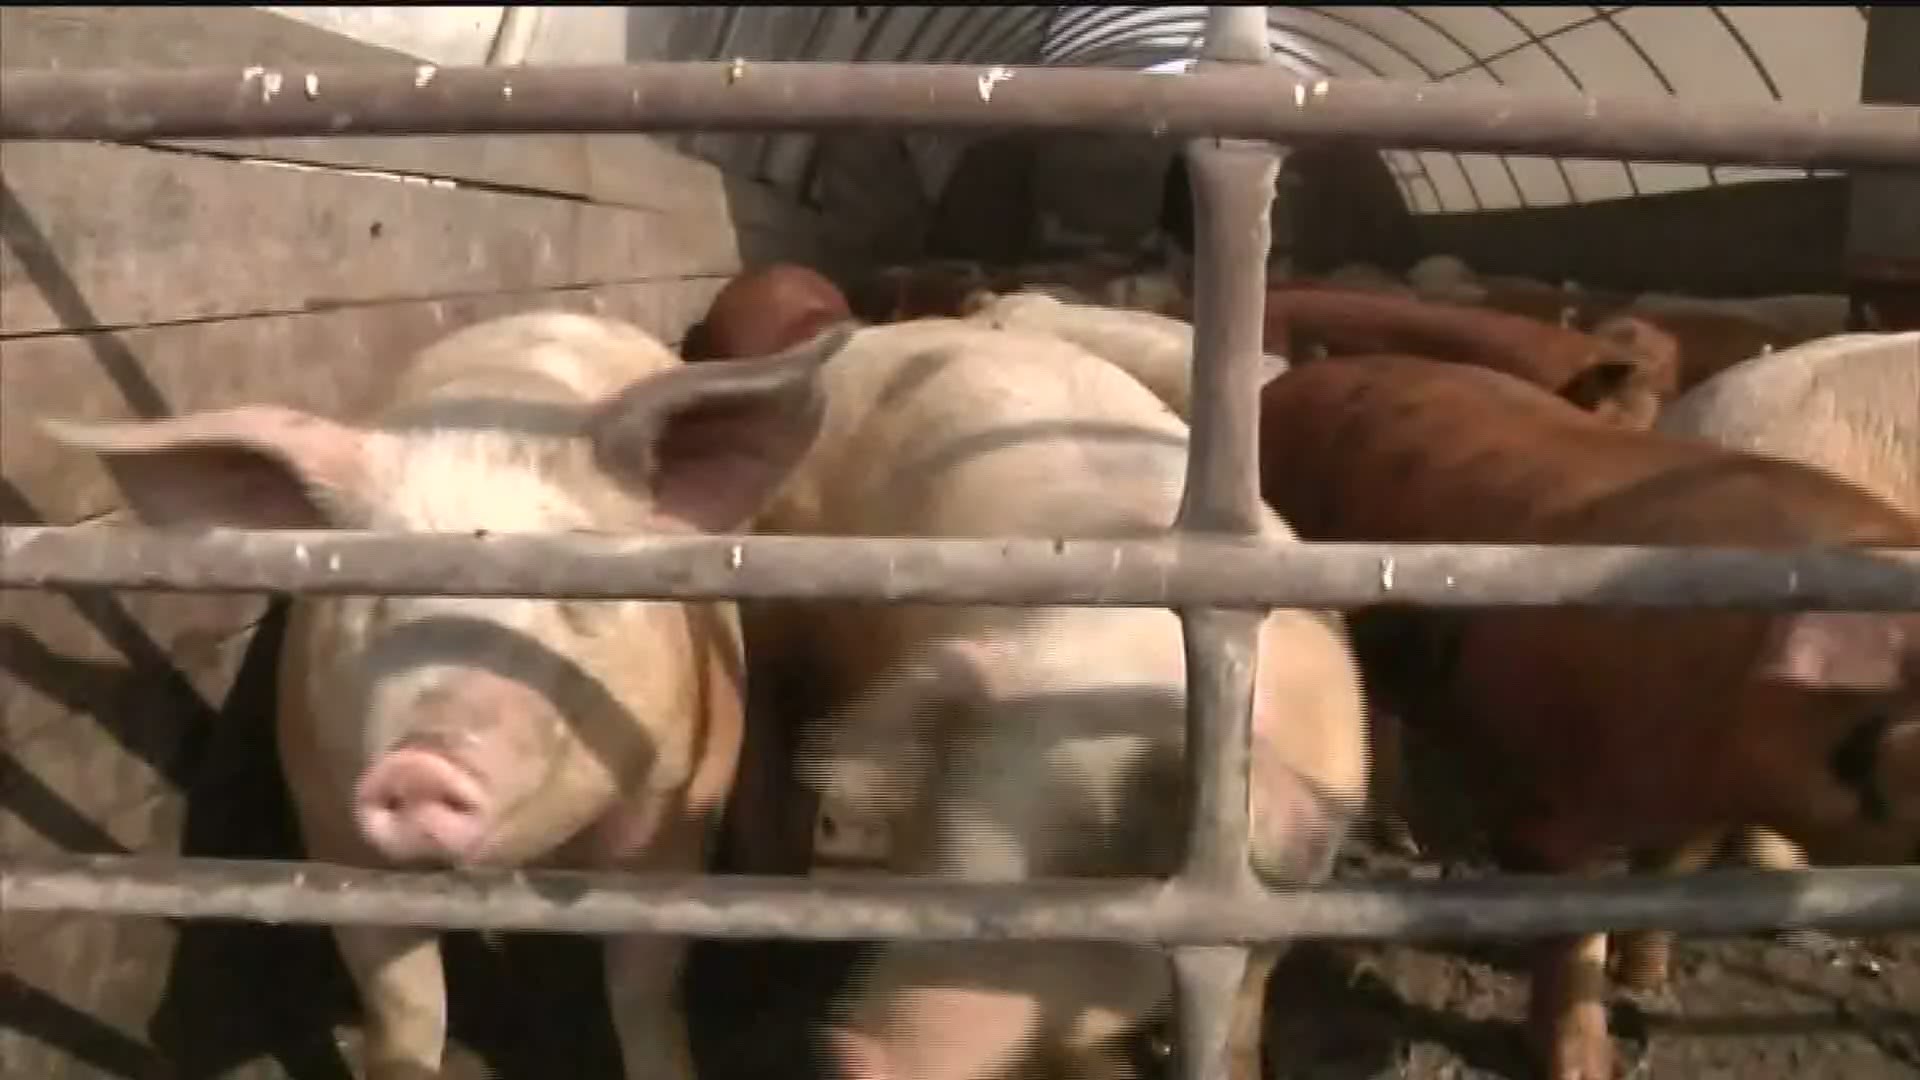 Hog farmers have been hit hard by the coronavirus pandemic, some being forced to thin their herds.